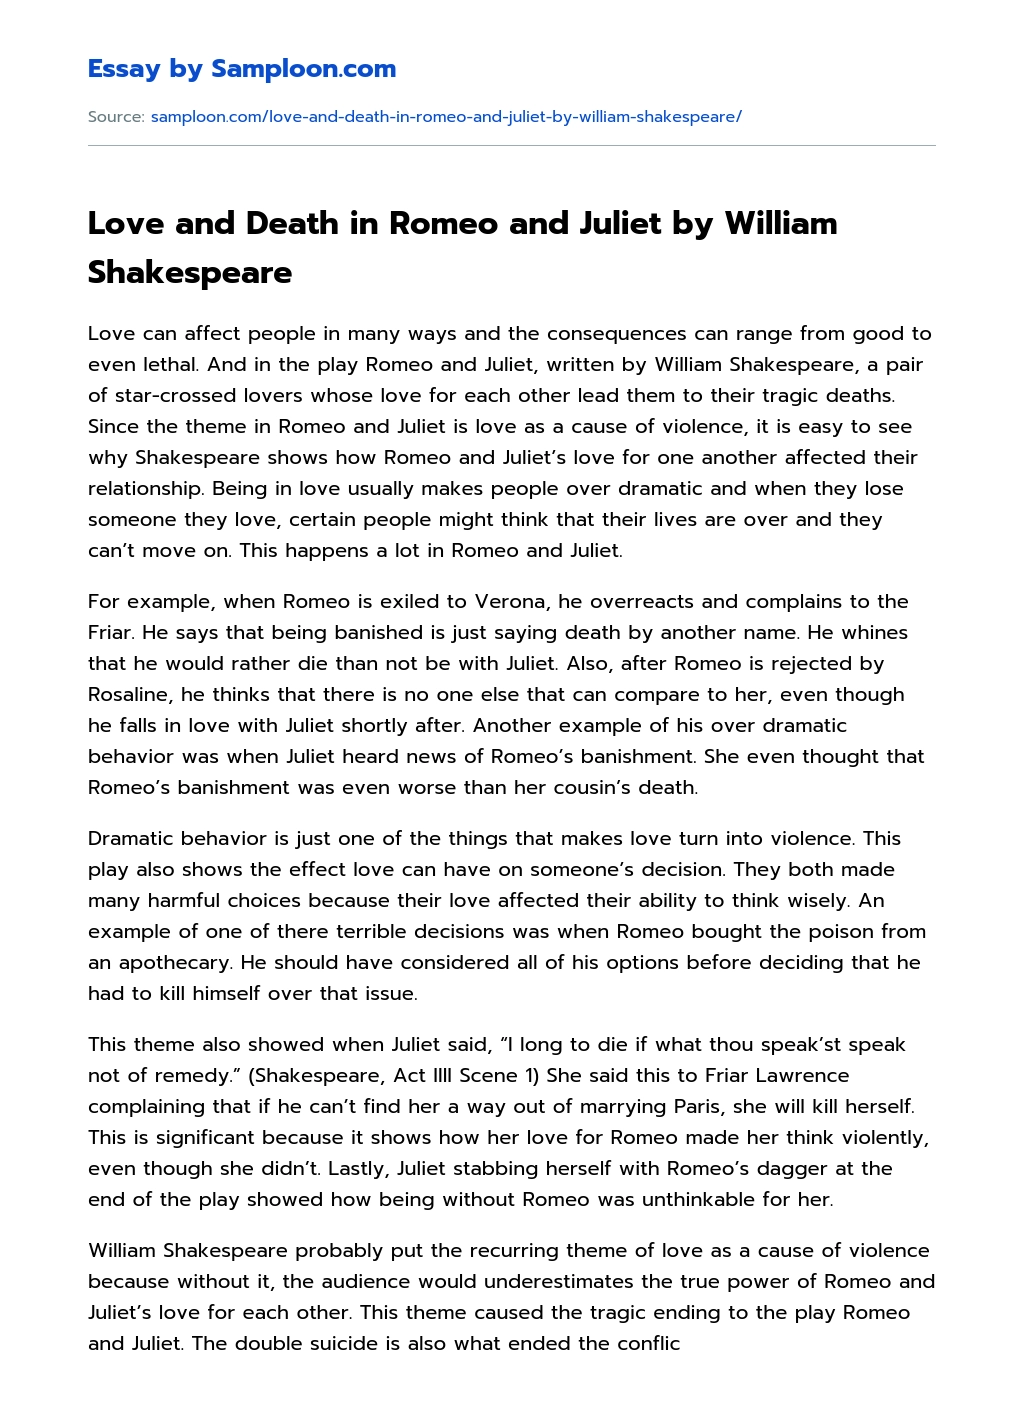 Love and Death in Romeo and Juliet by William Shakespeare Argumentative Essay essay